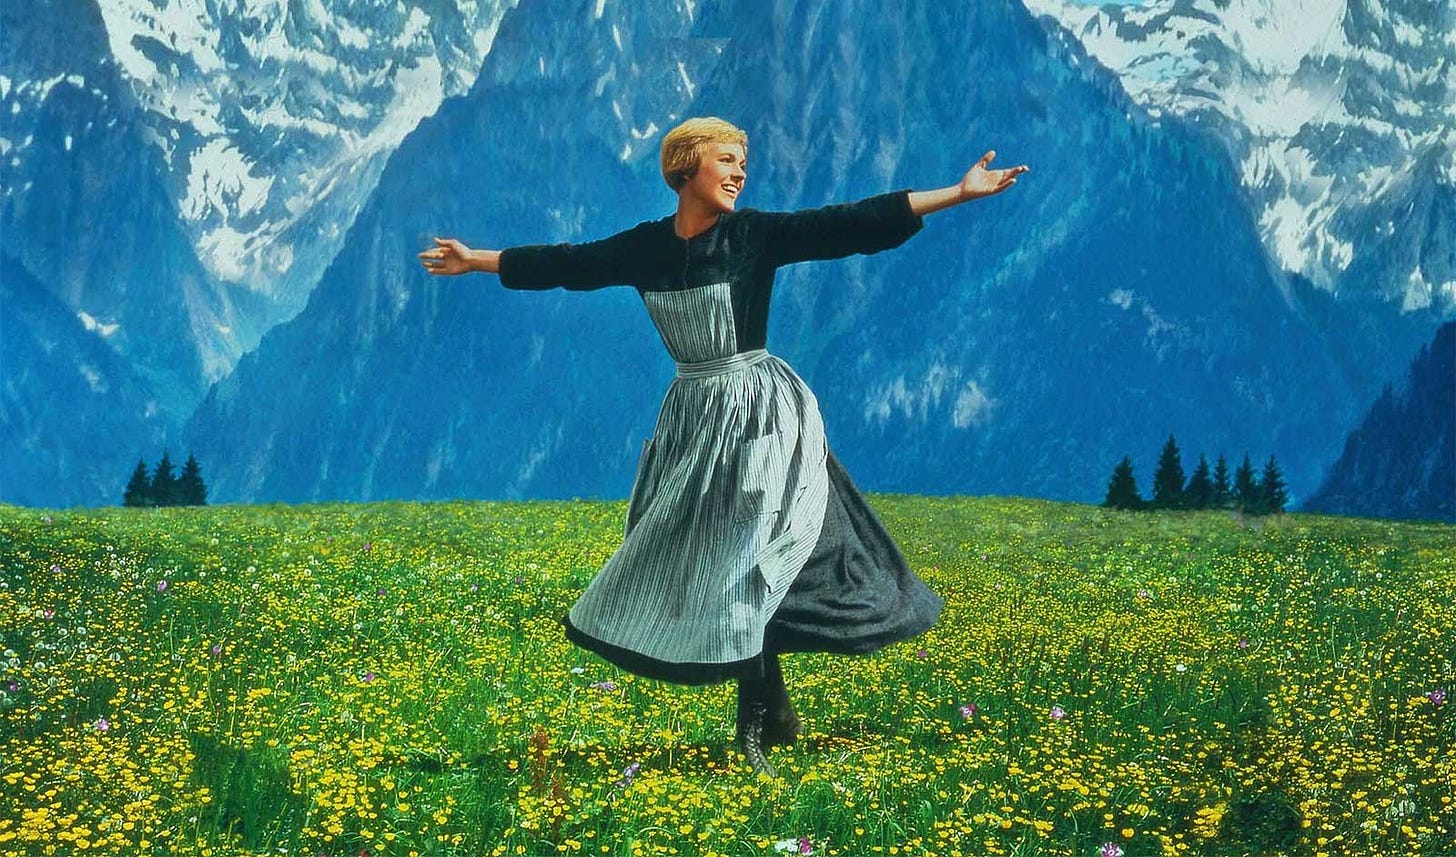 The Sound of Music - everything about the film